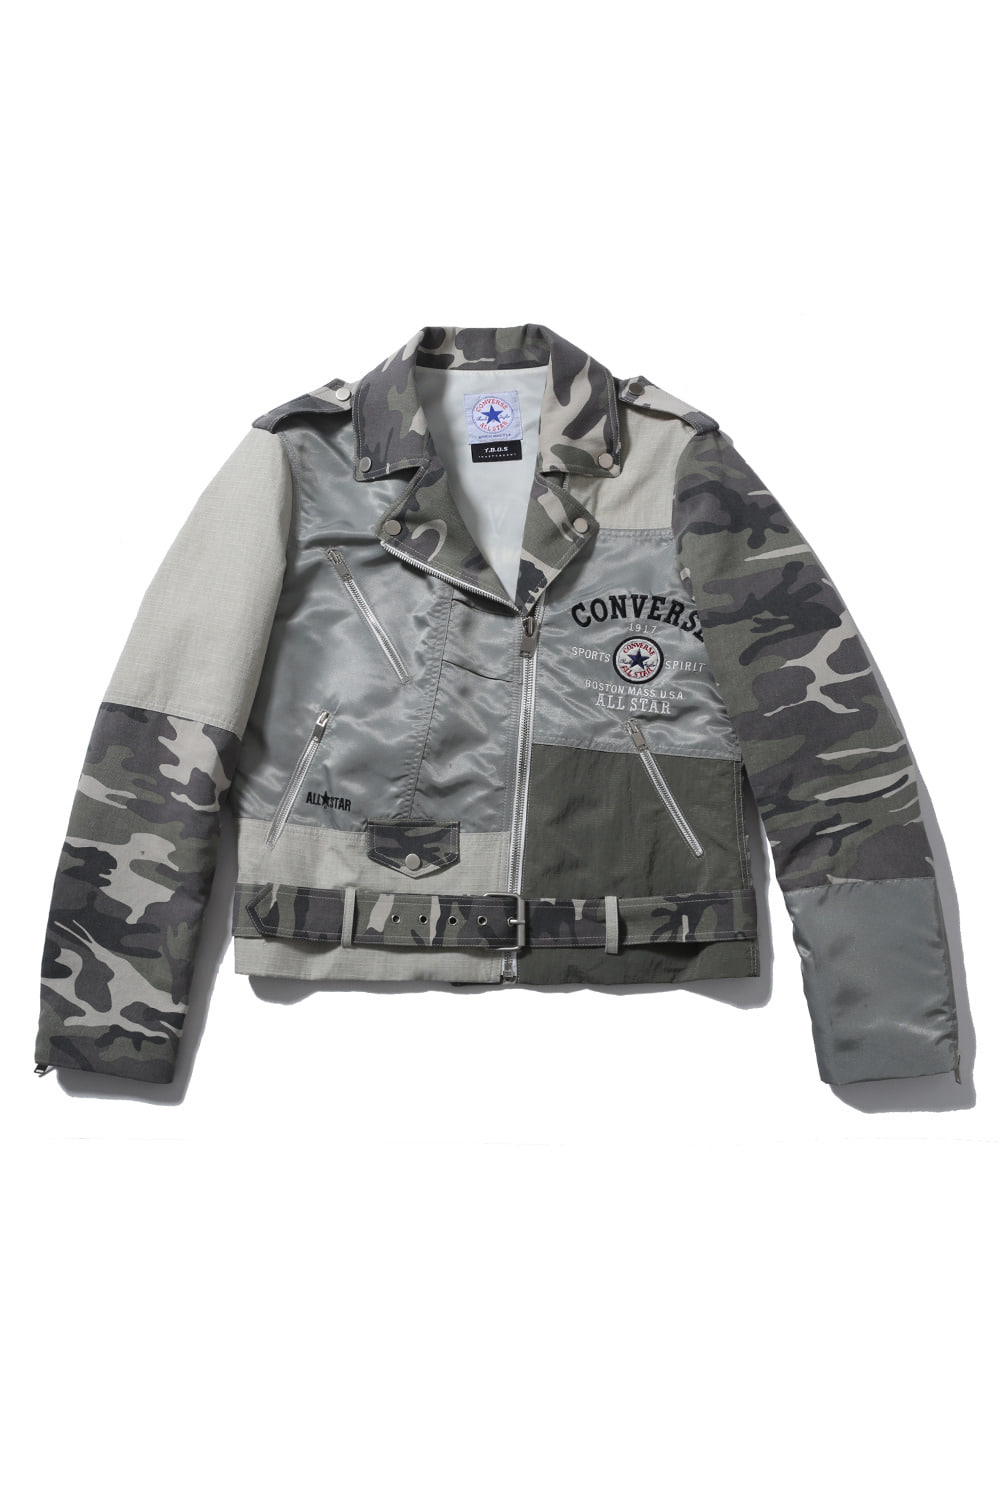 T.B.O.S x CONVERSE Restructured Camouflage Rider Jacket